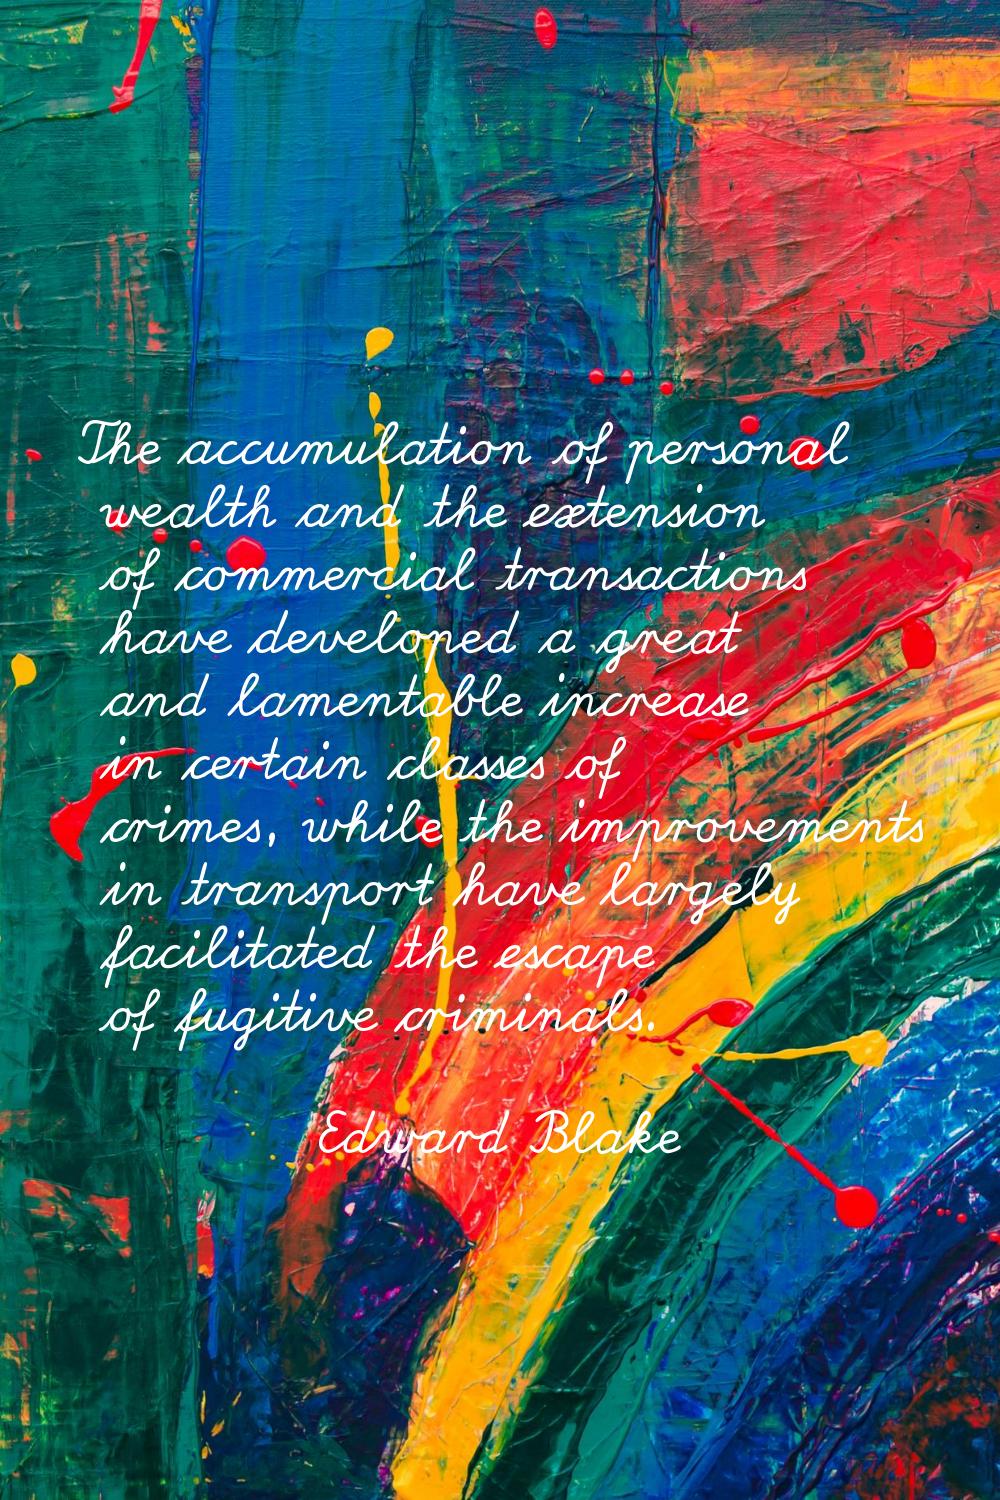 The accumulation of personal wealth and the extension of commercial transactions have developed a g